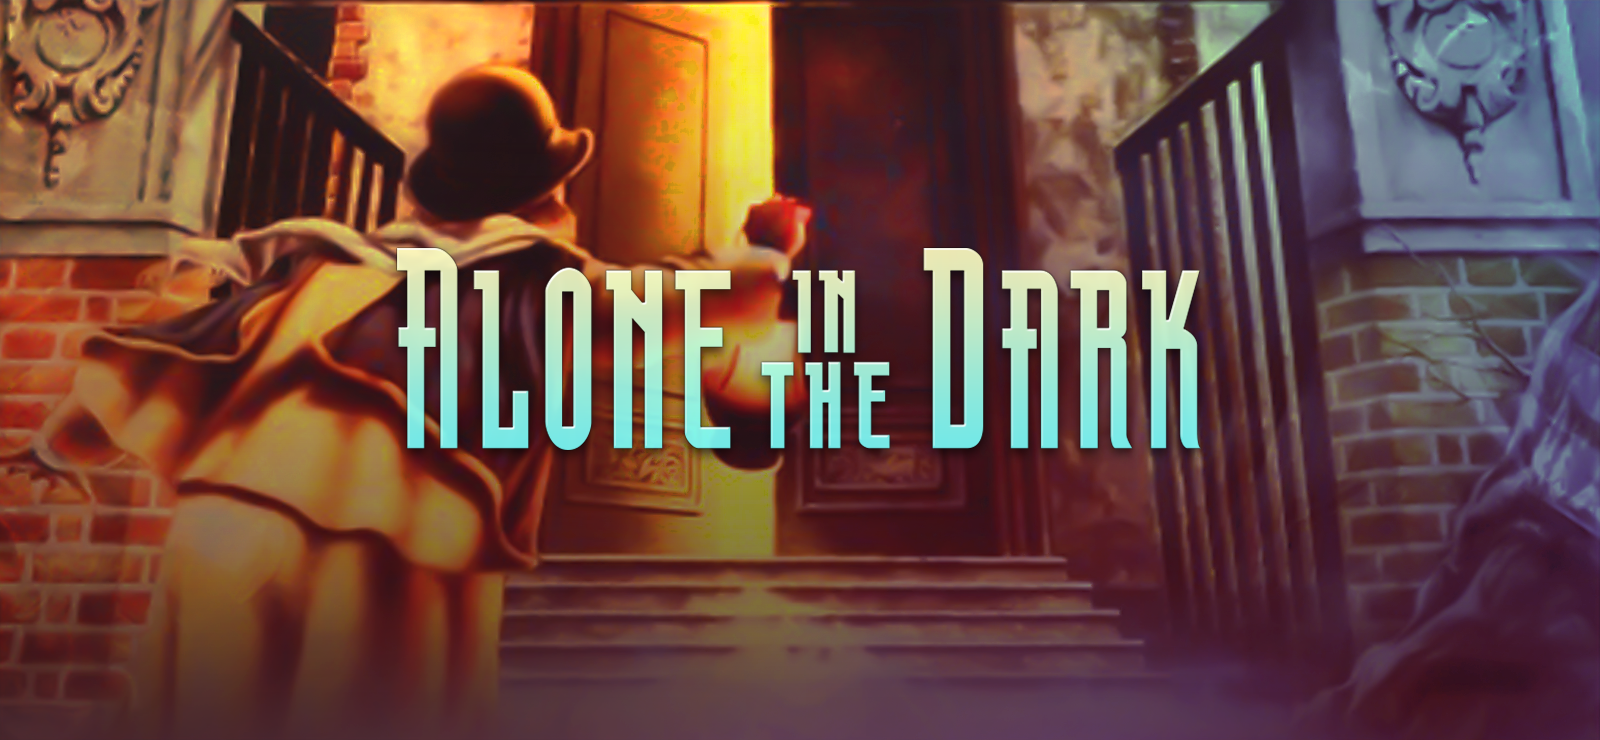 Alone In The Dark: The Trilogy 1+2+3